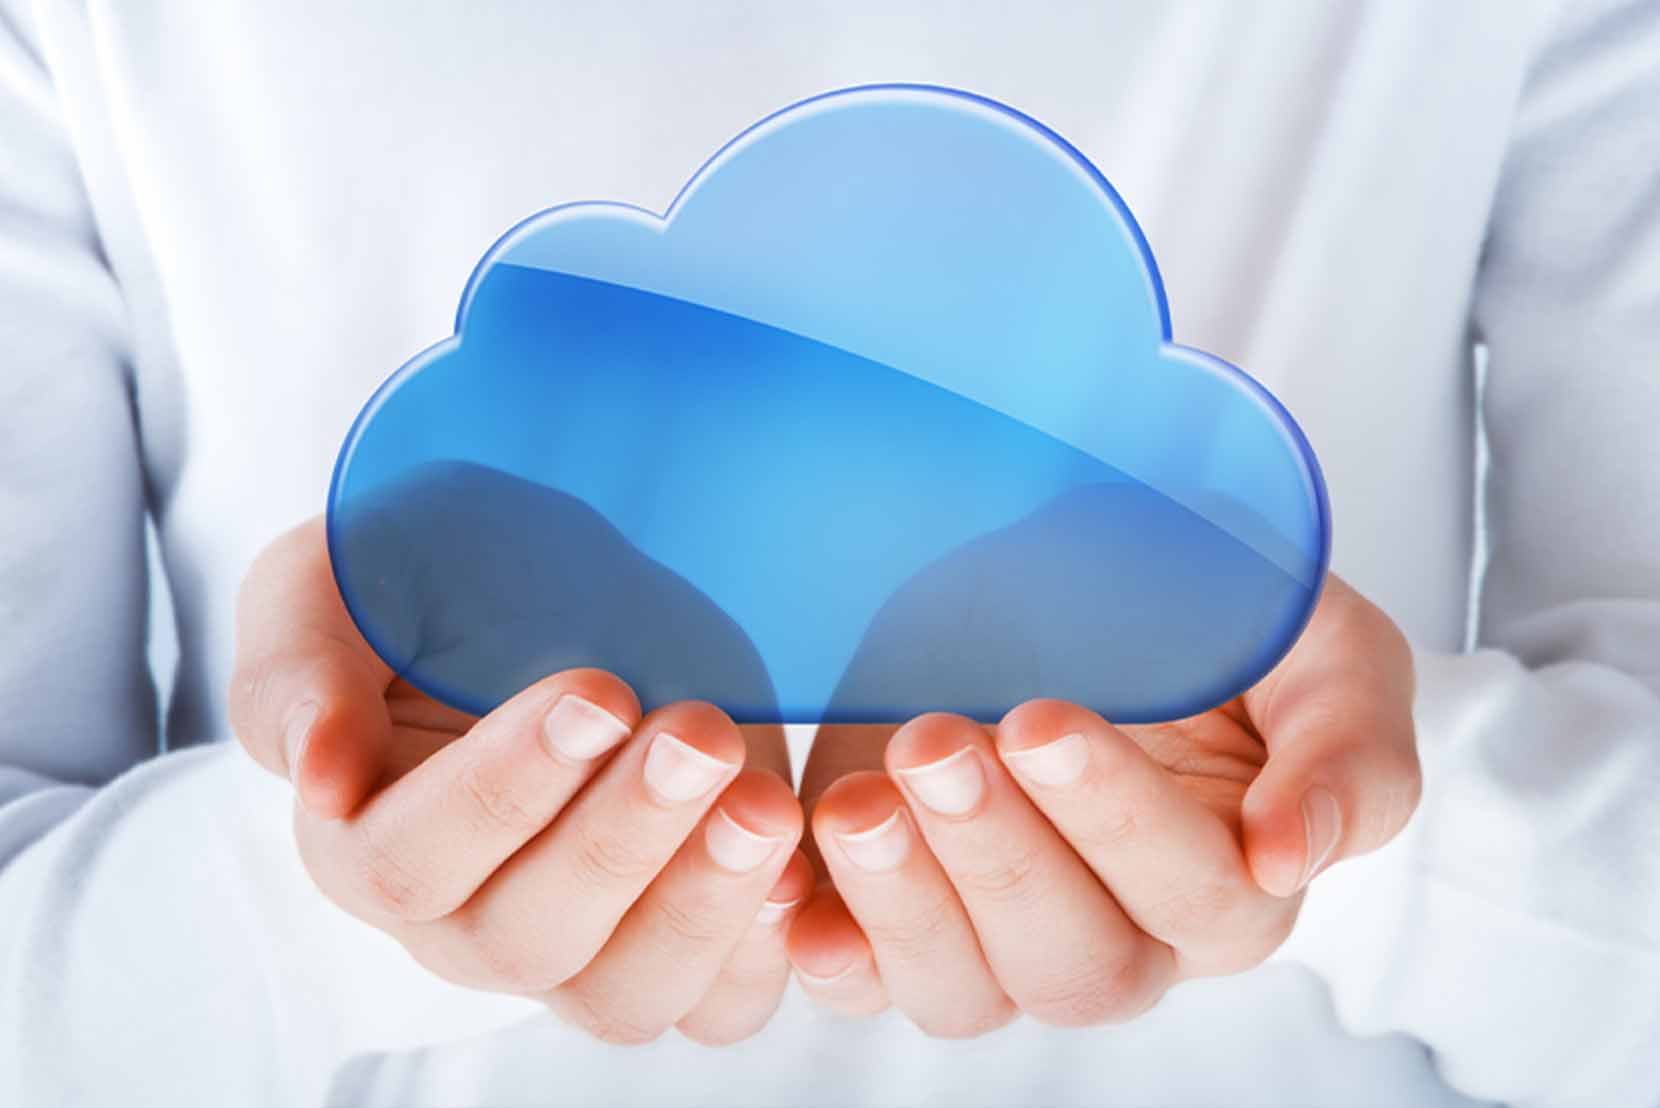 Navigate through cloud complexity to achieve cloud clarity